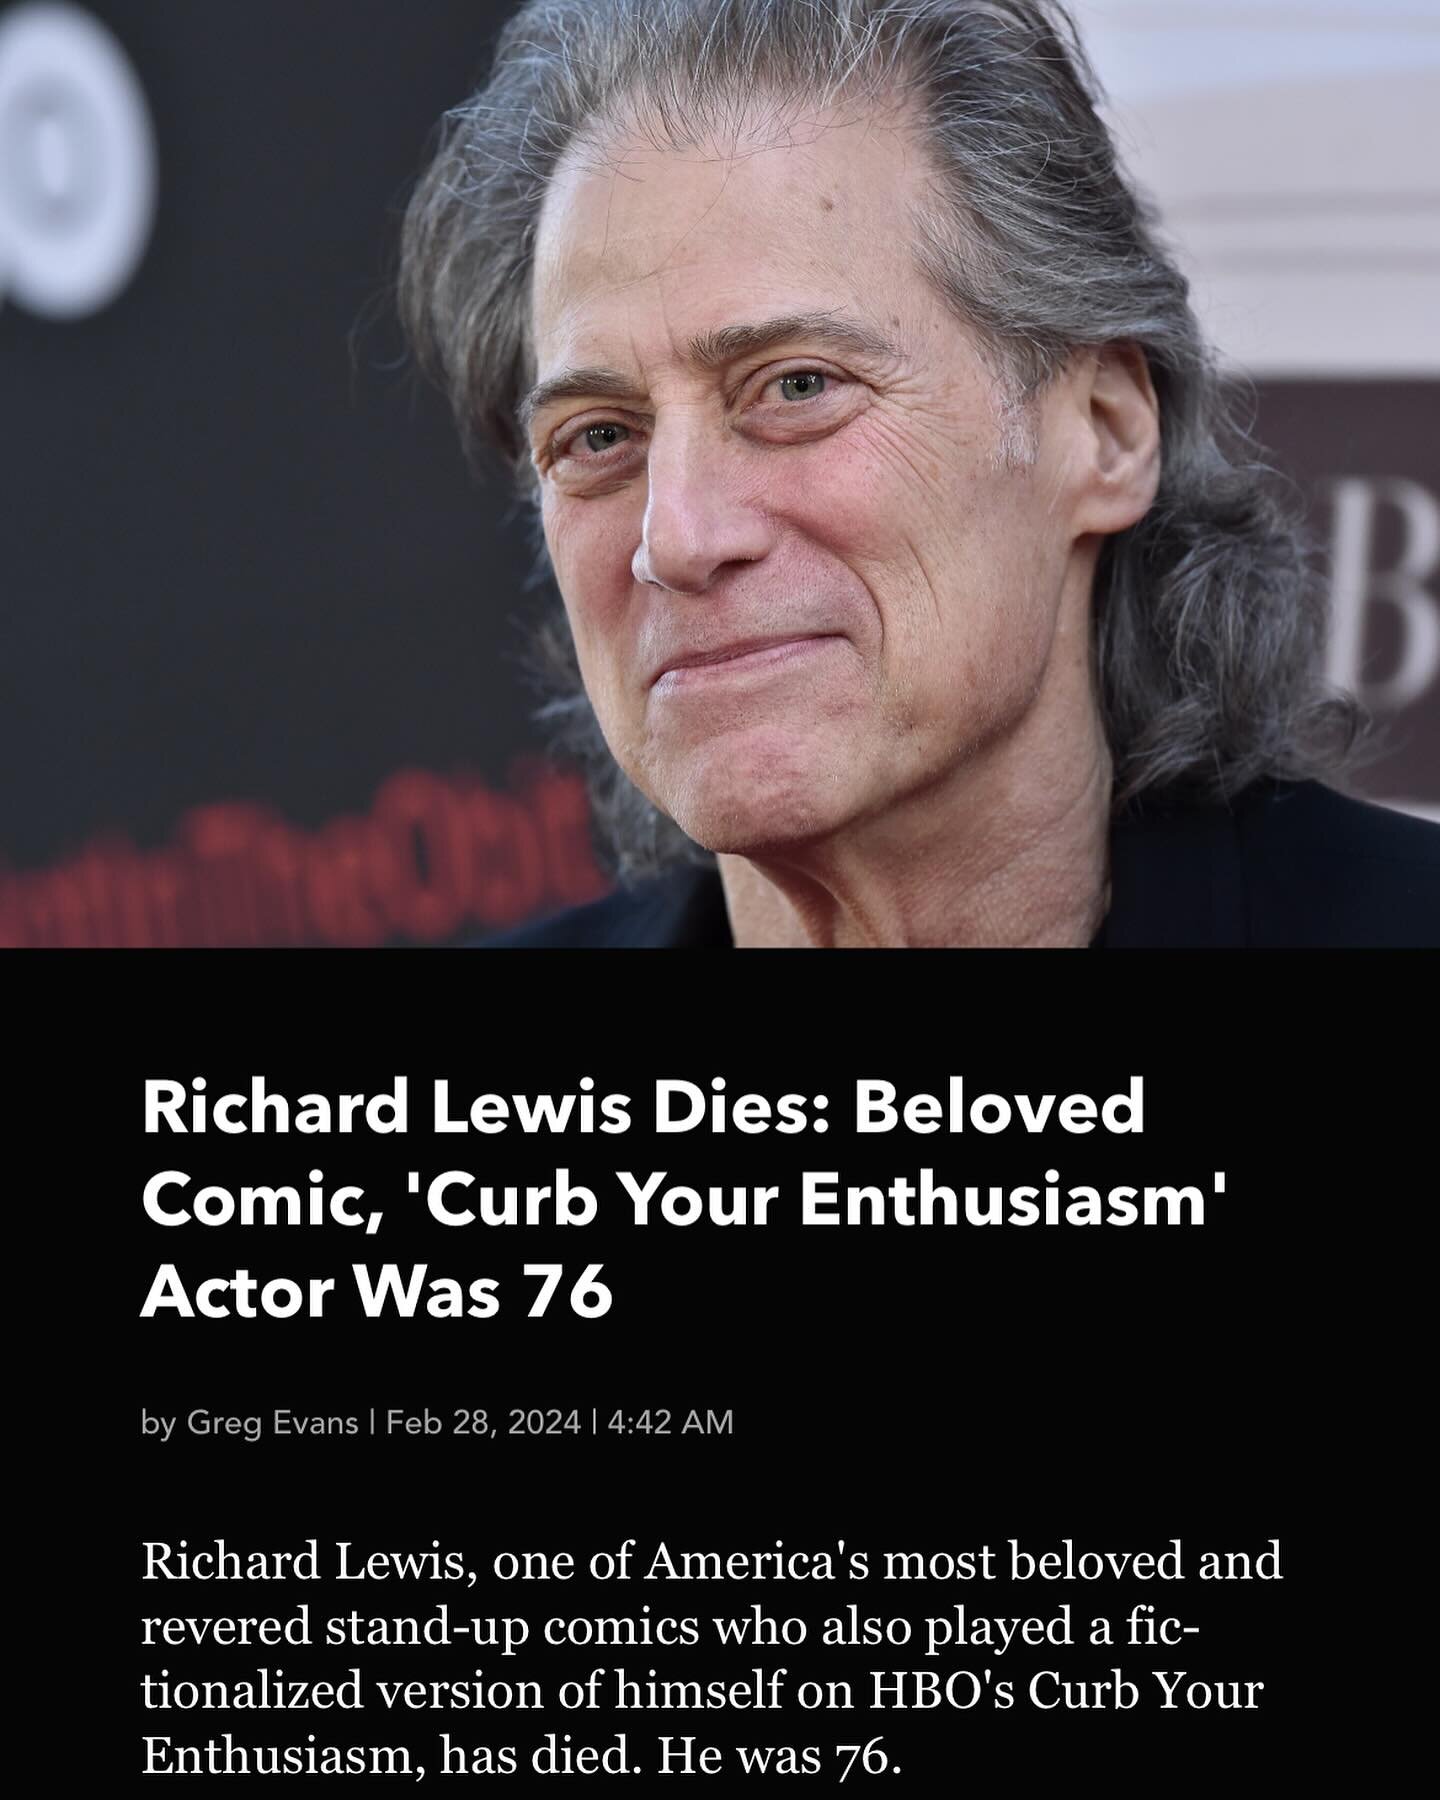 Rest in Peace Richard Philip Lewis (June 29, 1947 &ndash; February 27, 2024) was an American actor, writer, and stand-up comedian. He came to prominence in the 1980s and became known for his dark, neurotic, and self-deprecating humor.

Lewis first tr